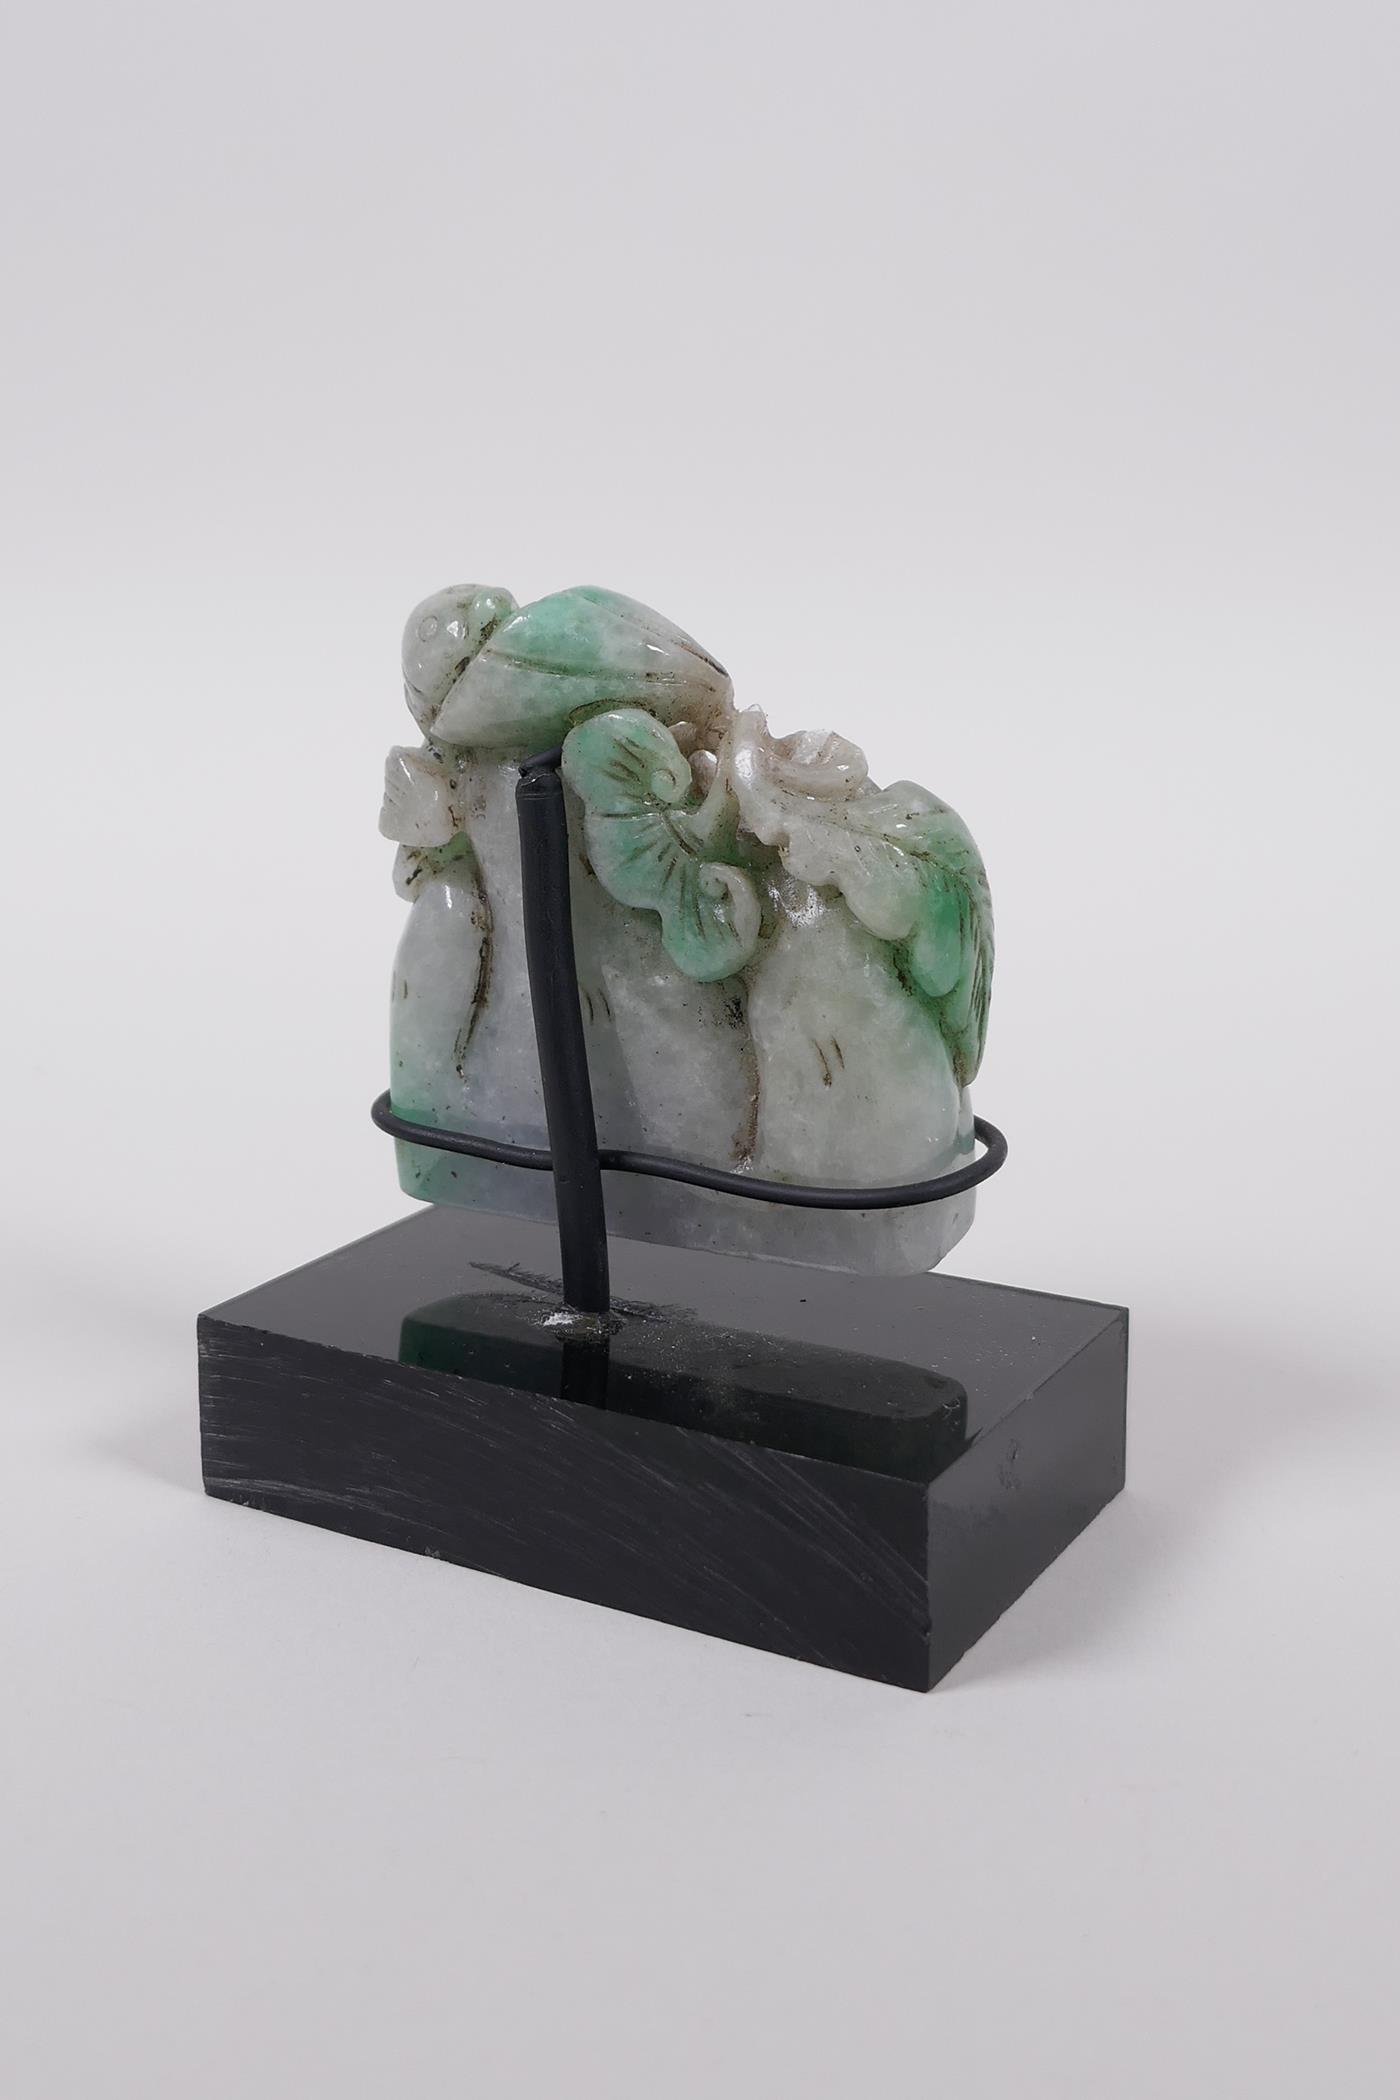 A Chinese mottled green jade carved ornament decorated with goldfish and lotus flowers on a - Image 3 of 4